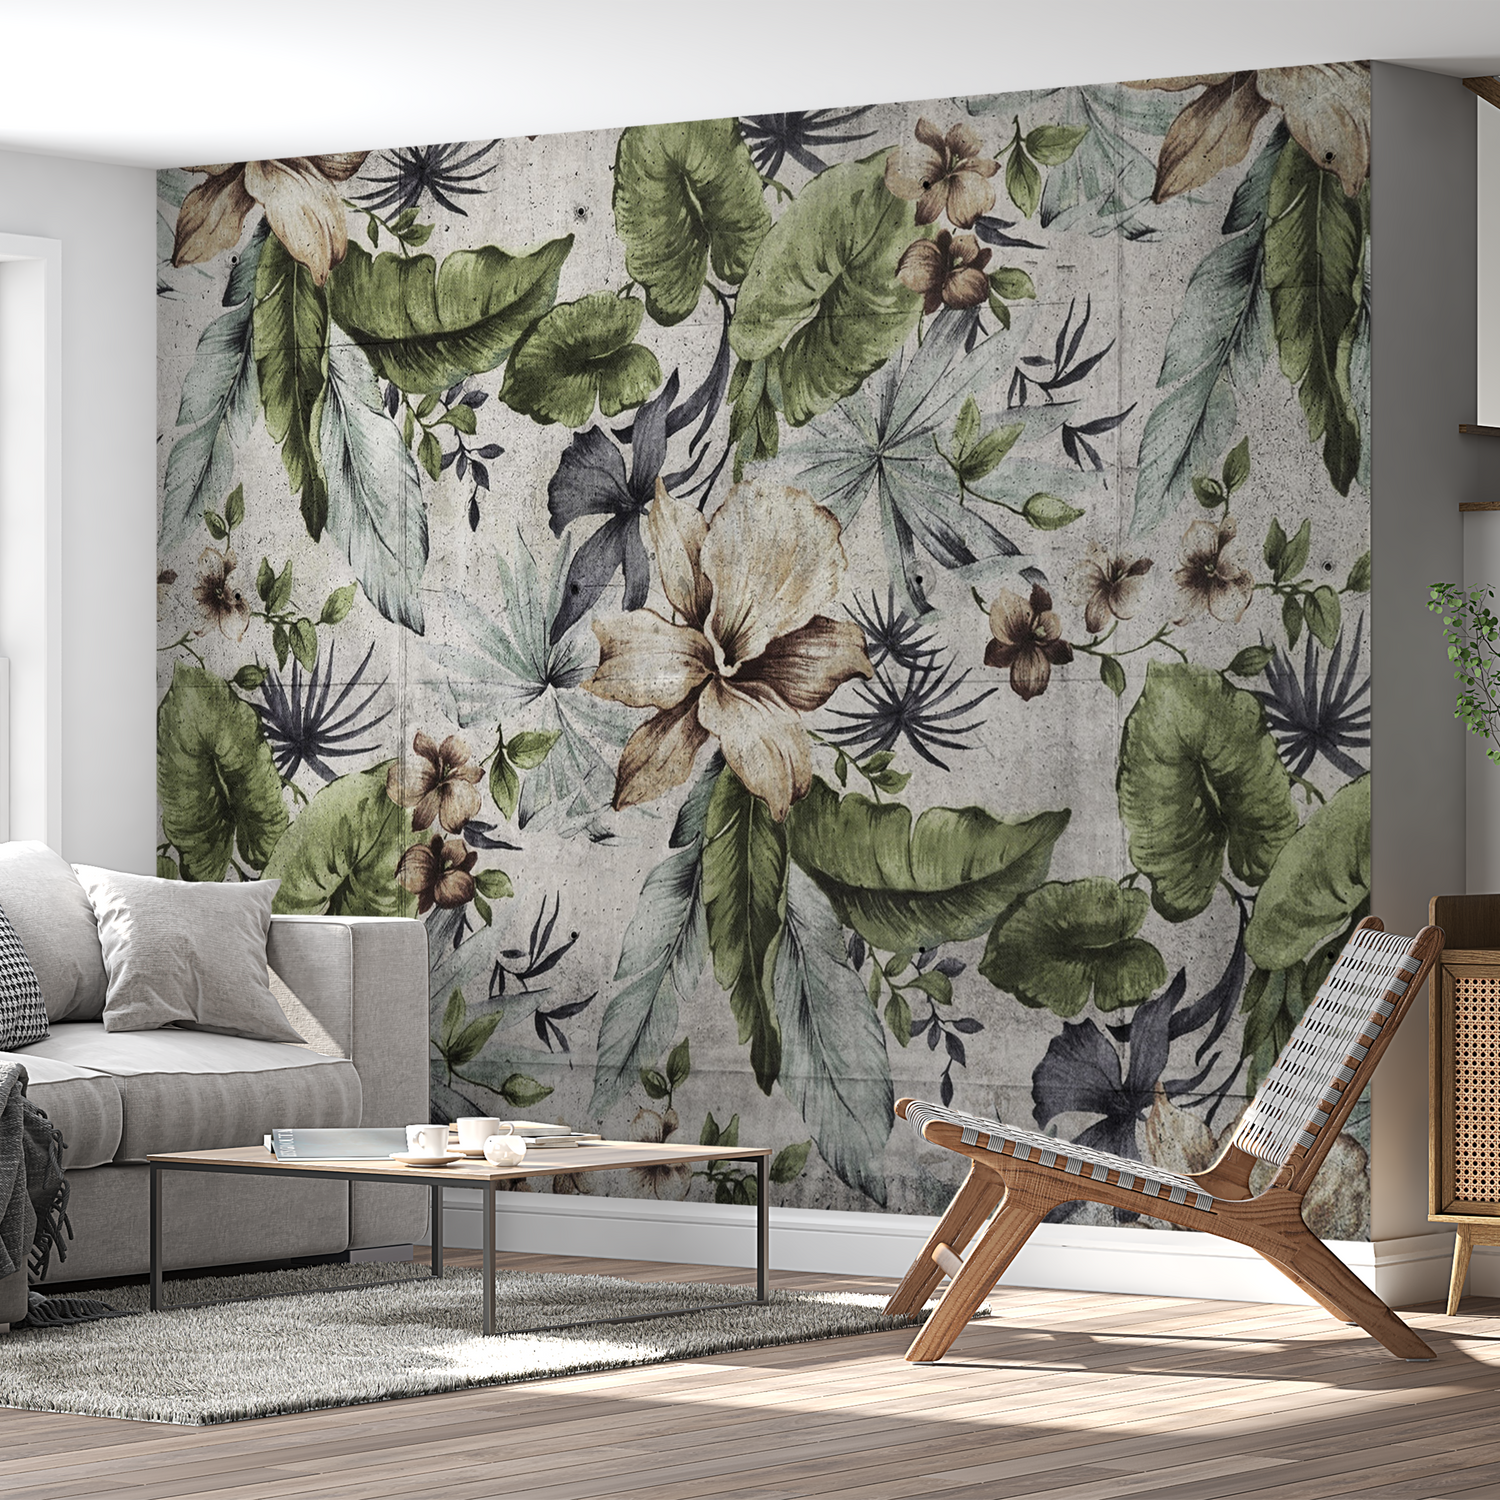 Peel & Stick Botanical Wall Mural - Floral Concrete Wall - Removable Wallpaper 38"Wx27"H